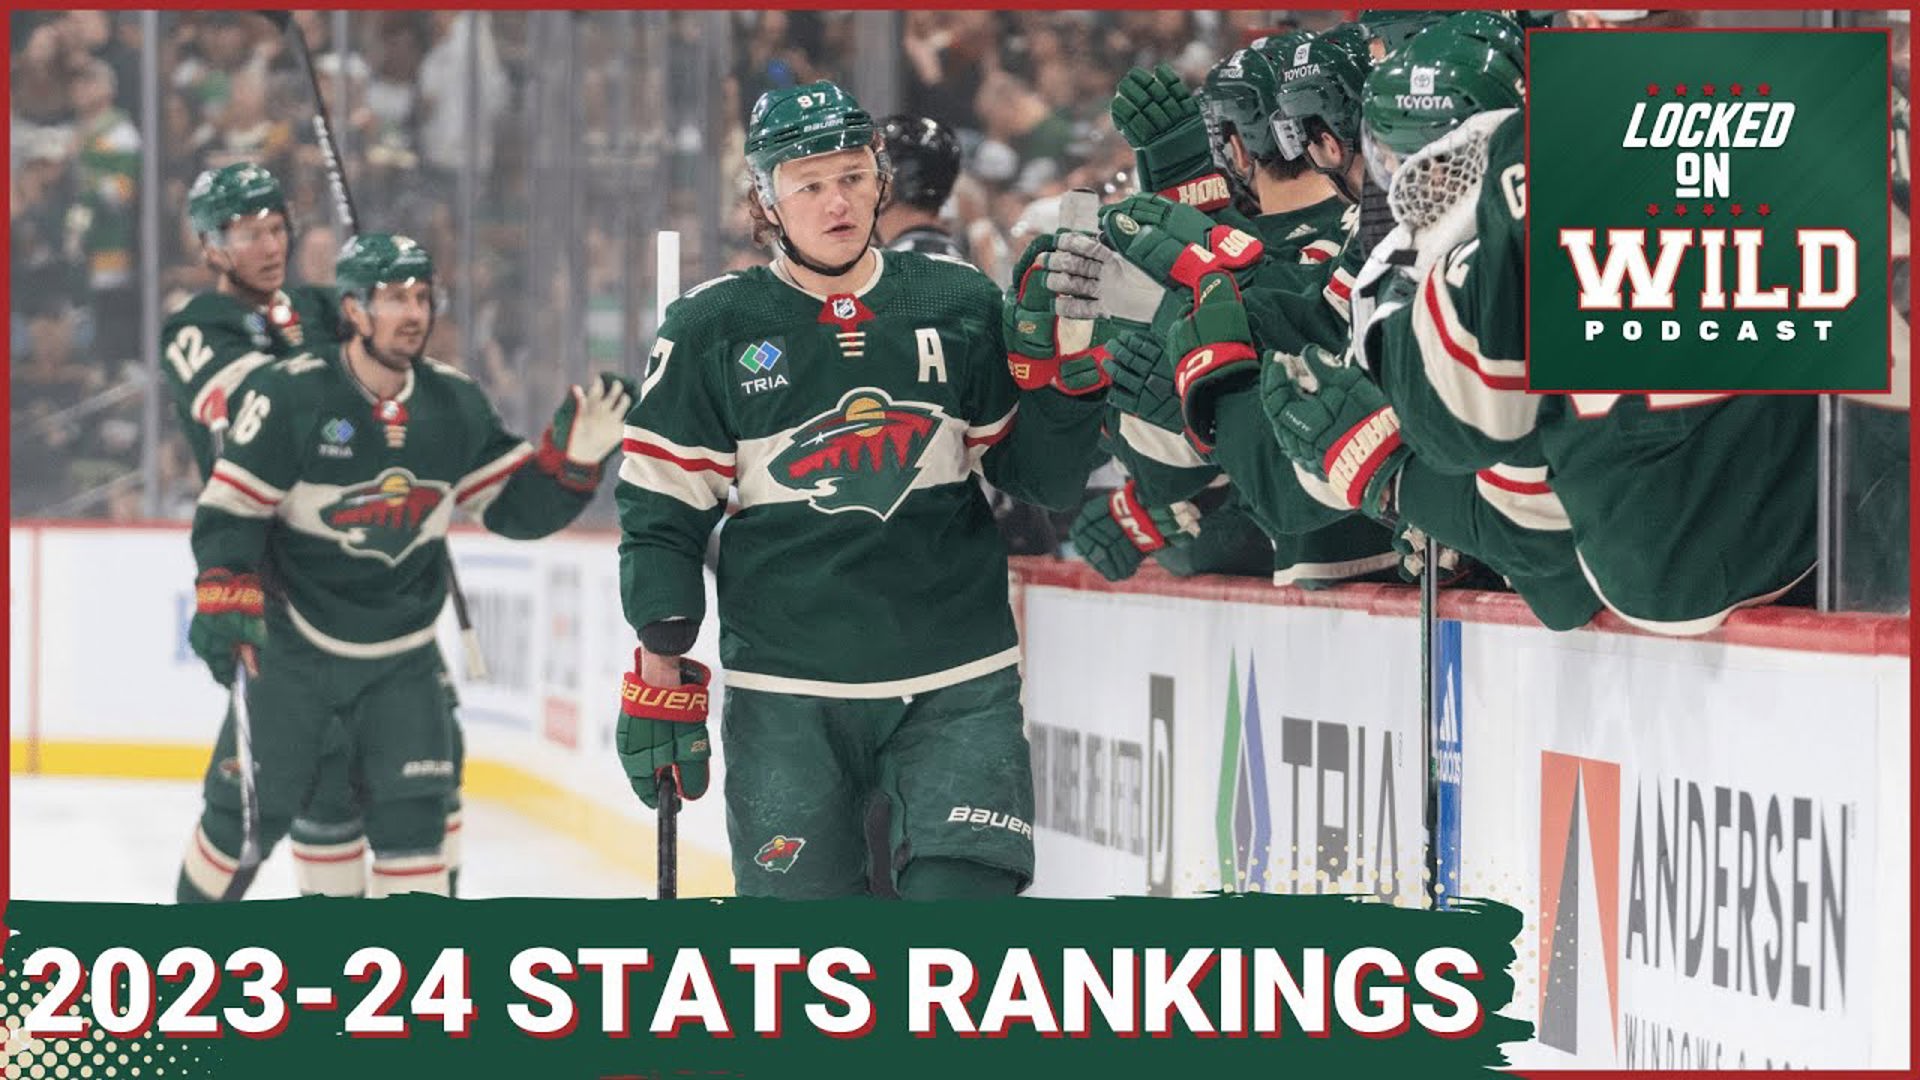 A Final Look at Where the 2023-24 Minnesota Wild Ranked Statistically